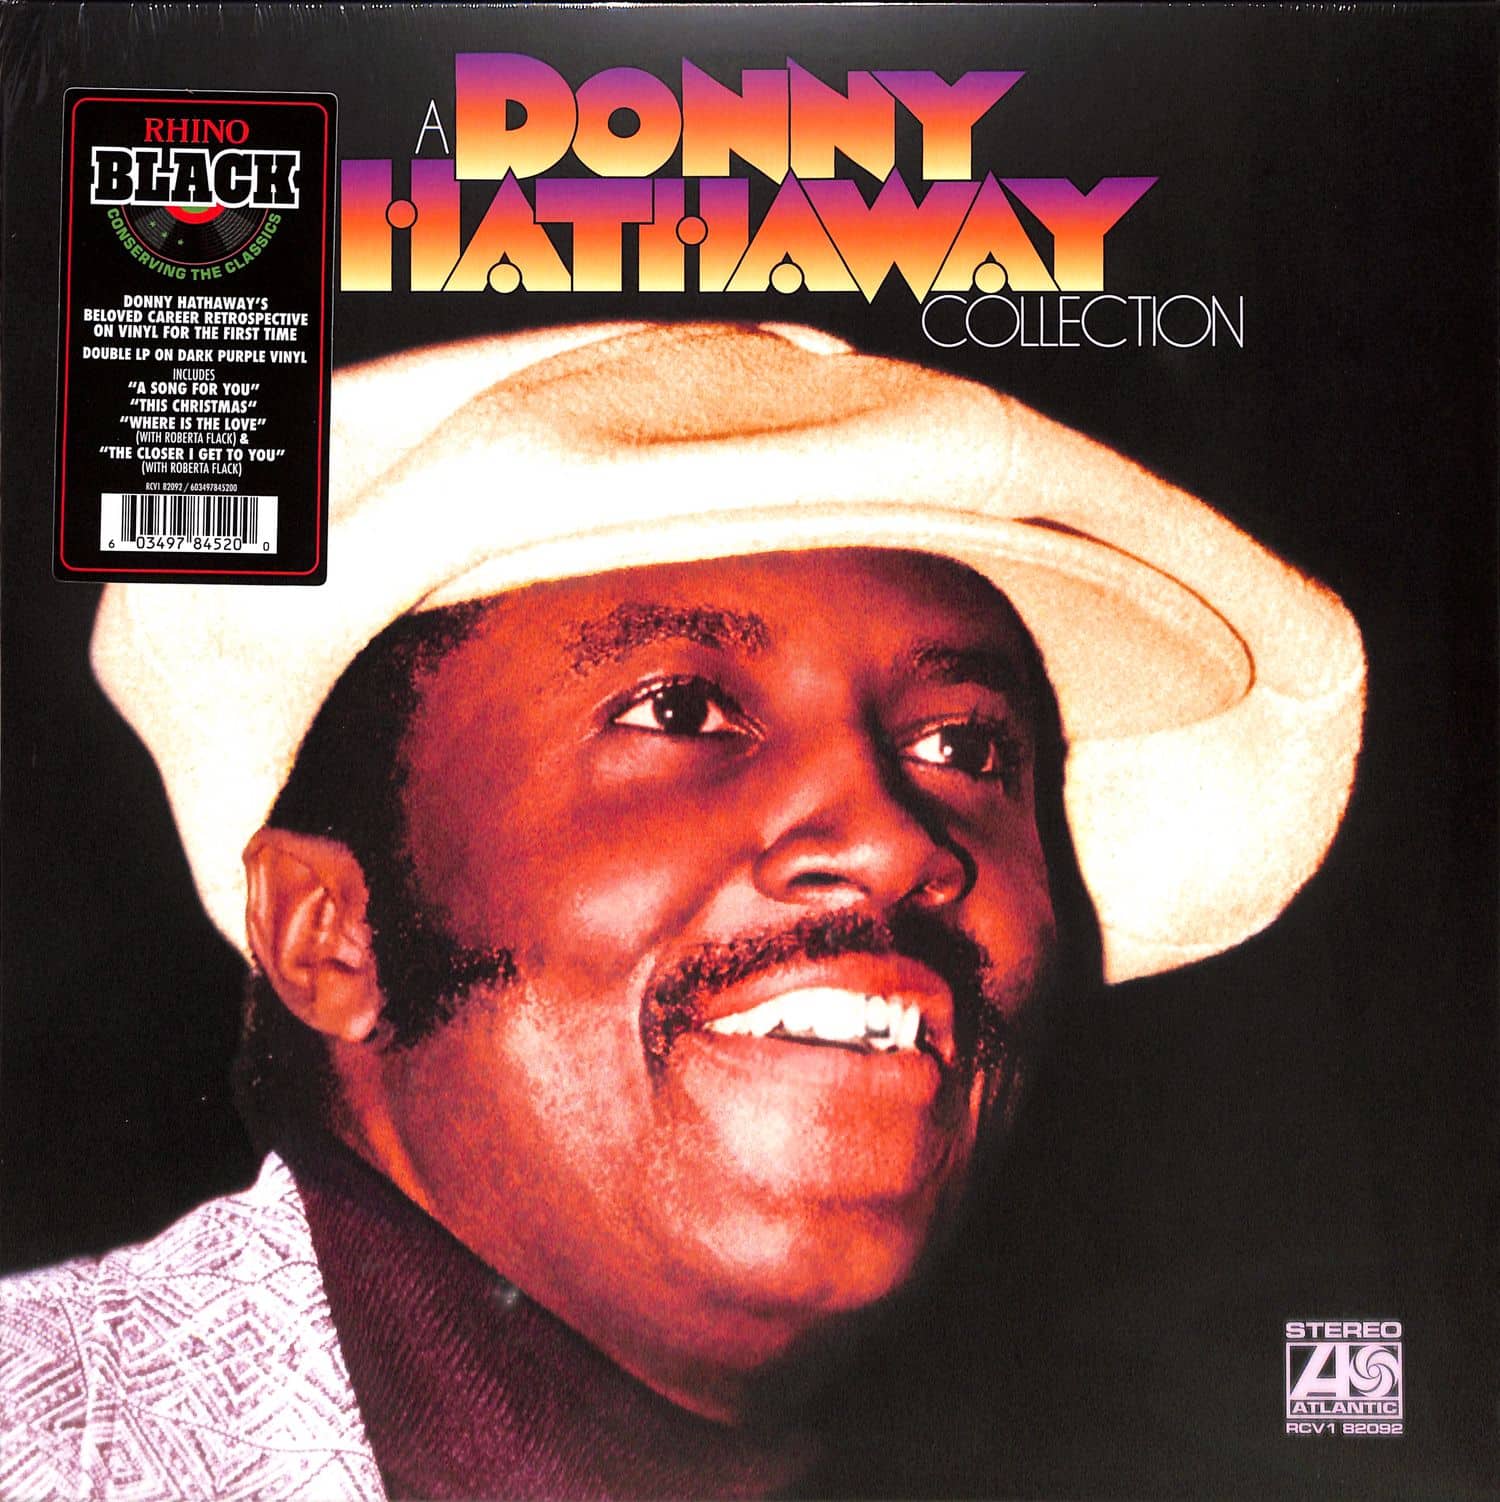 Donny Hathaway - A DONNY HATHAWAY COLLECTION 